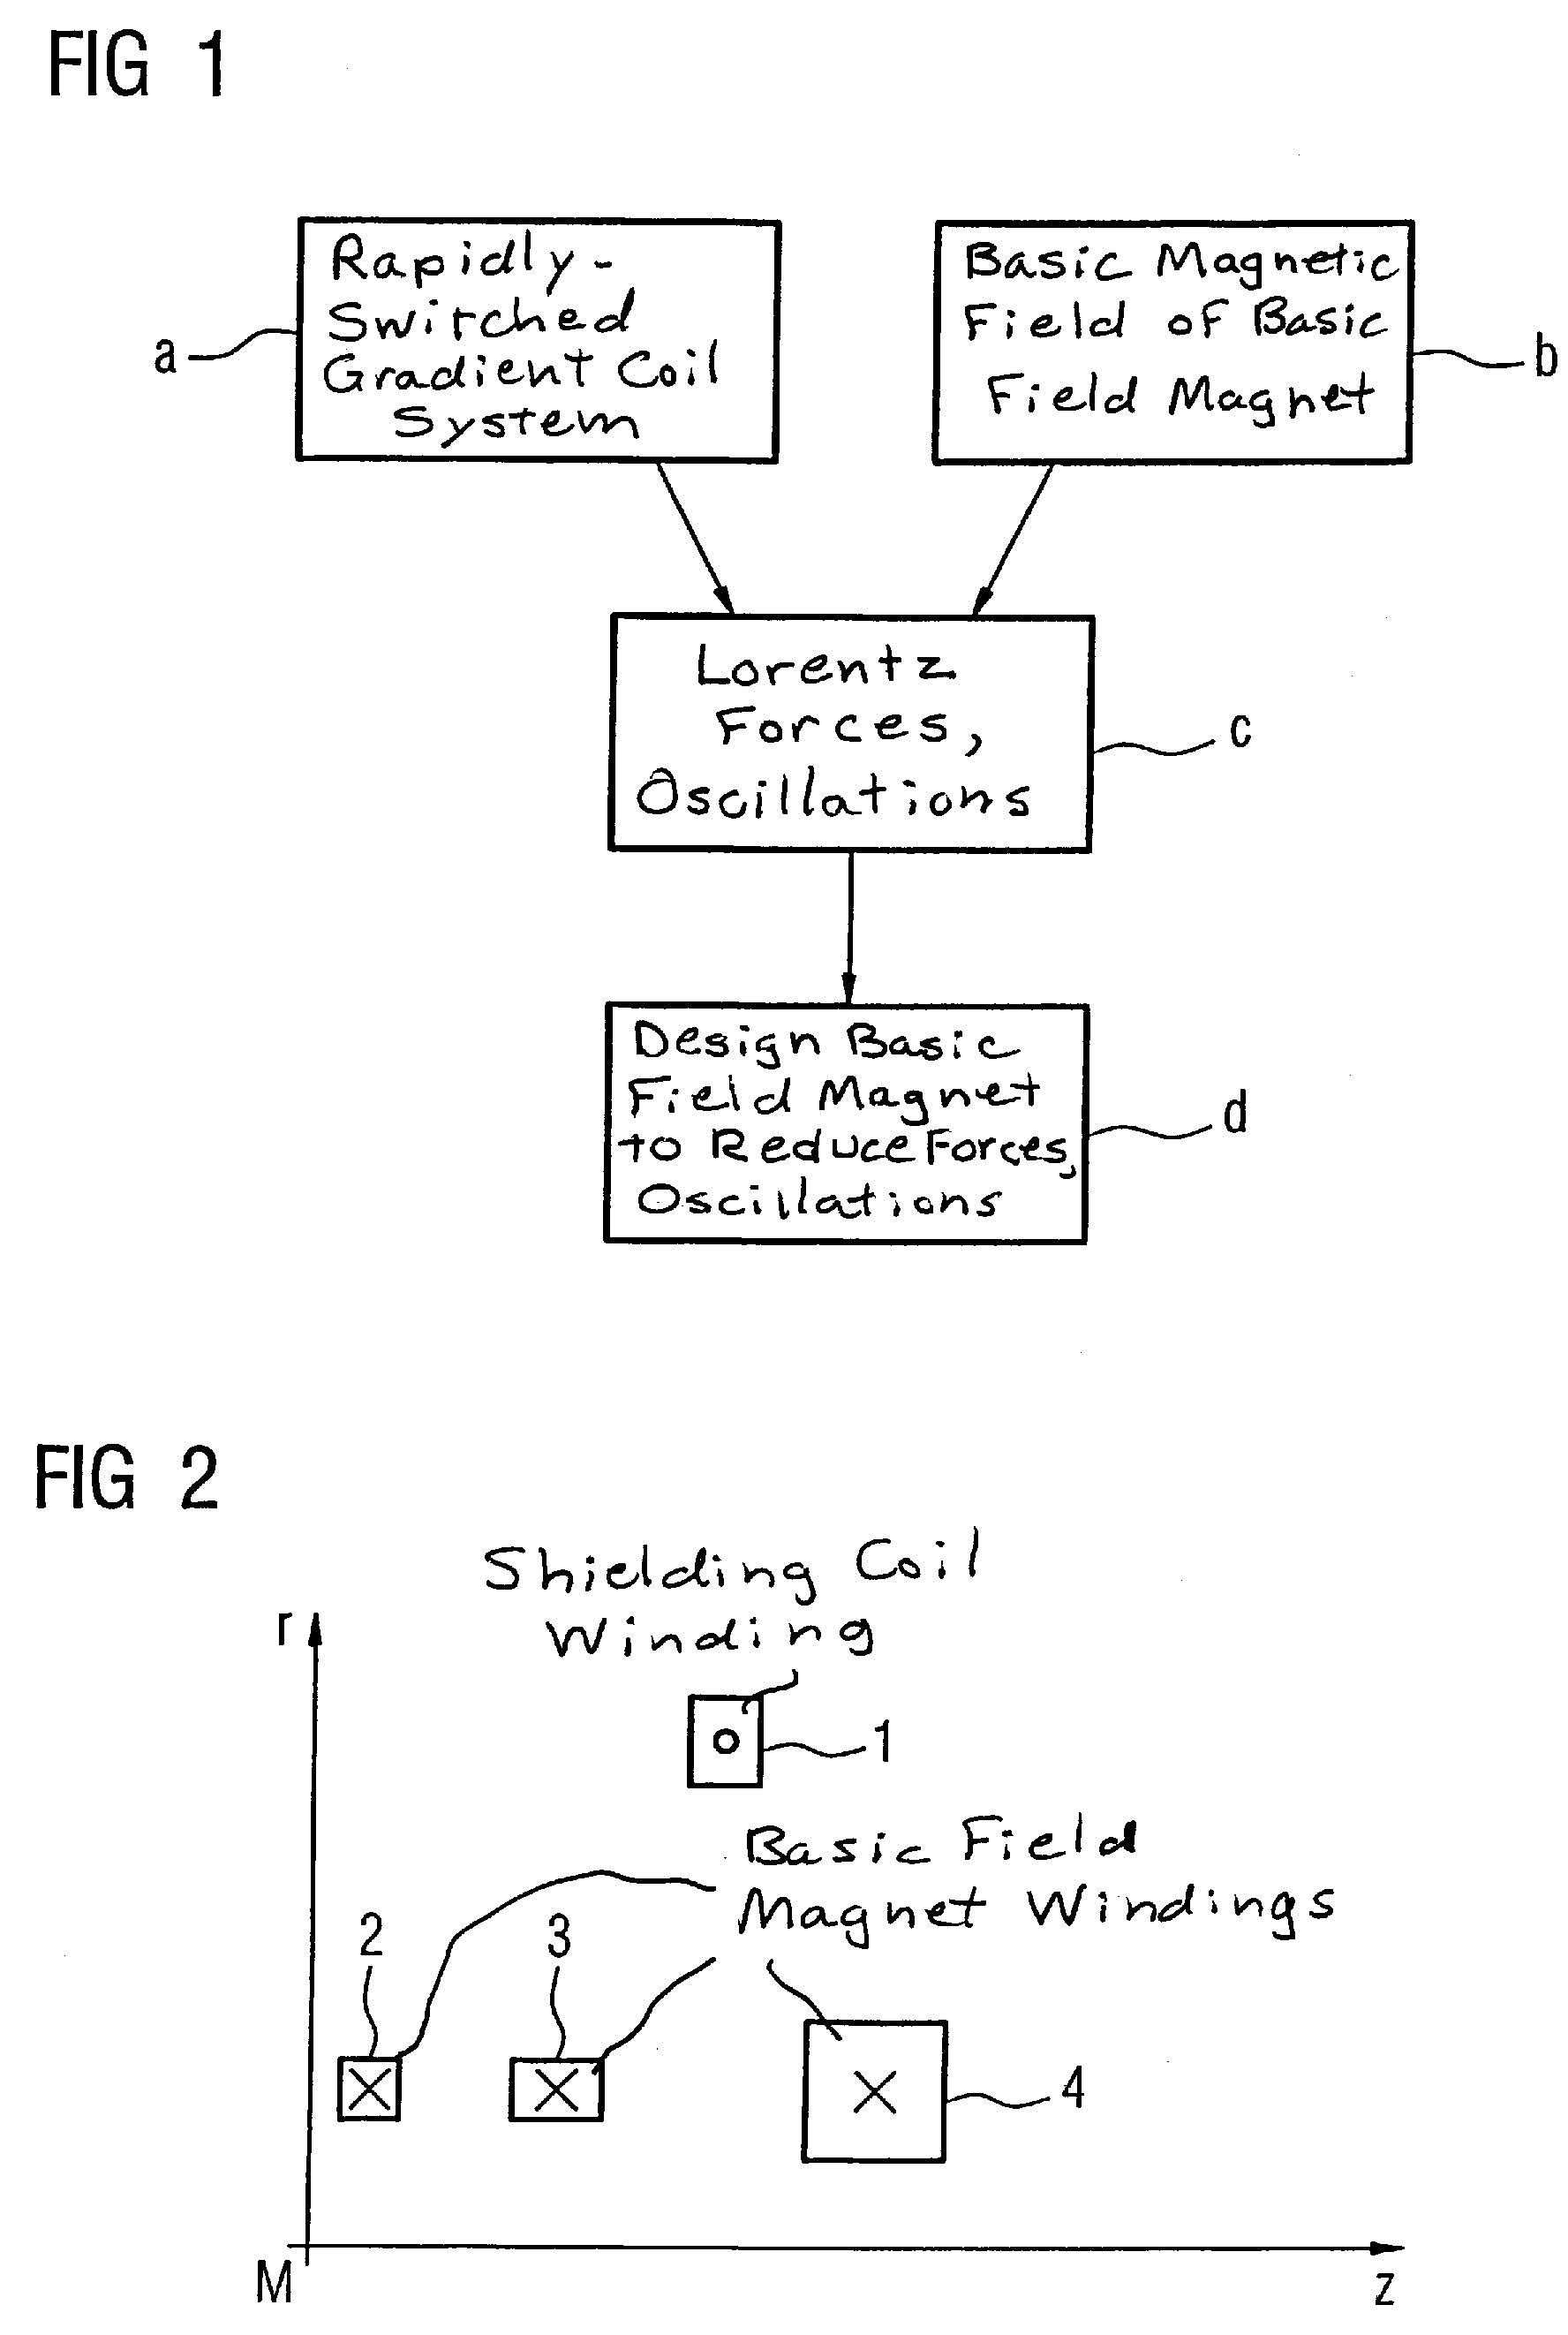 Method to determine the design of a basic magnet of a magnetic resonance apparatus with at least one gradient coil system